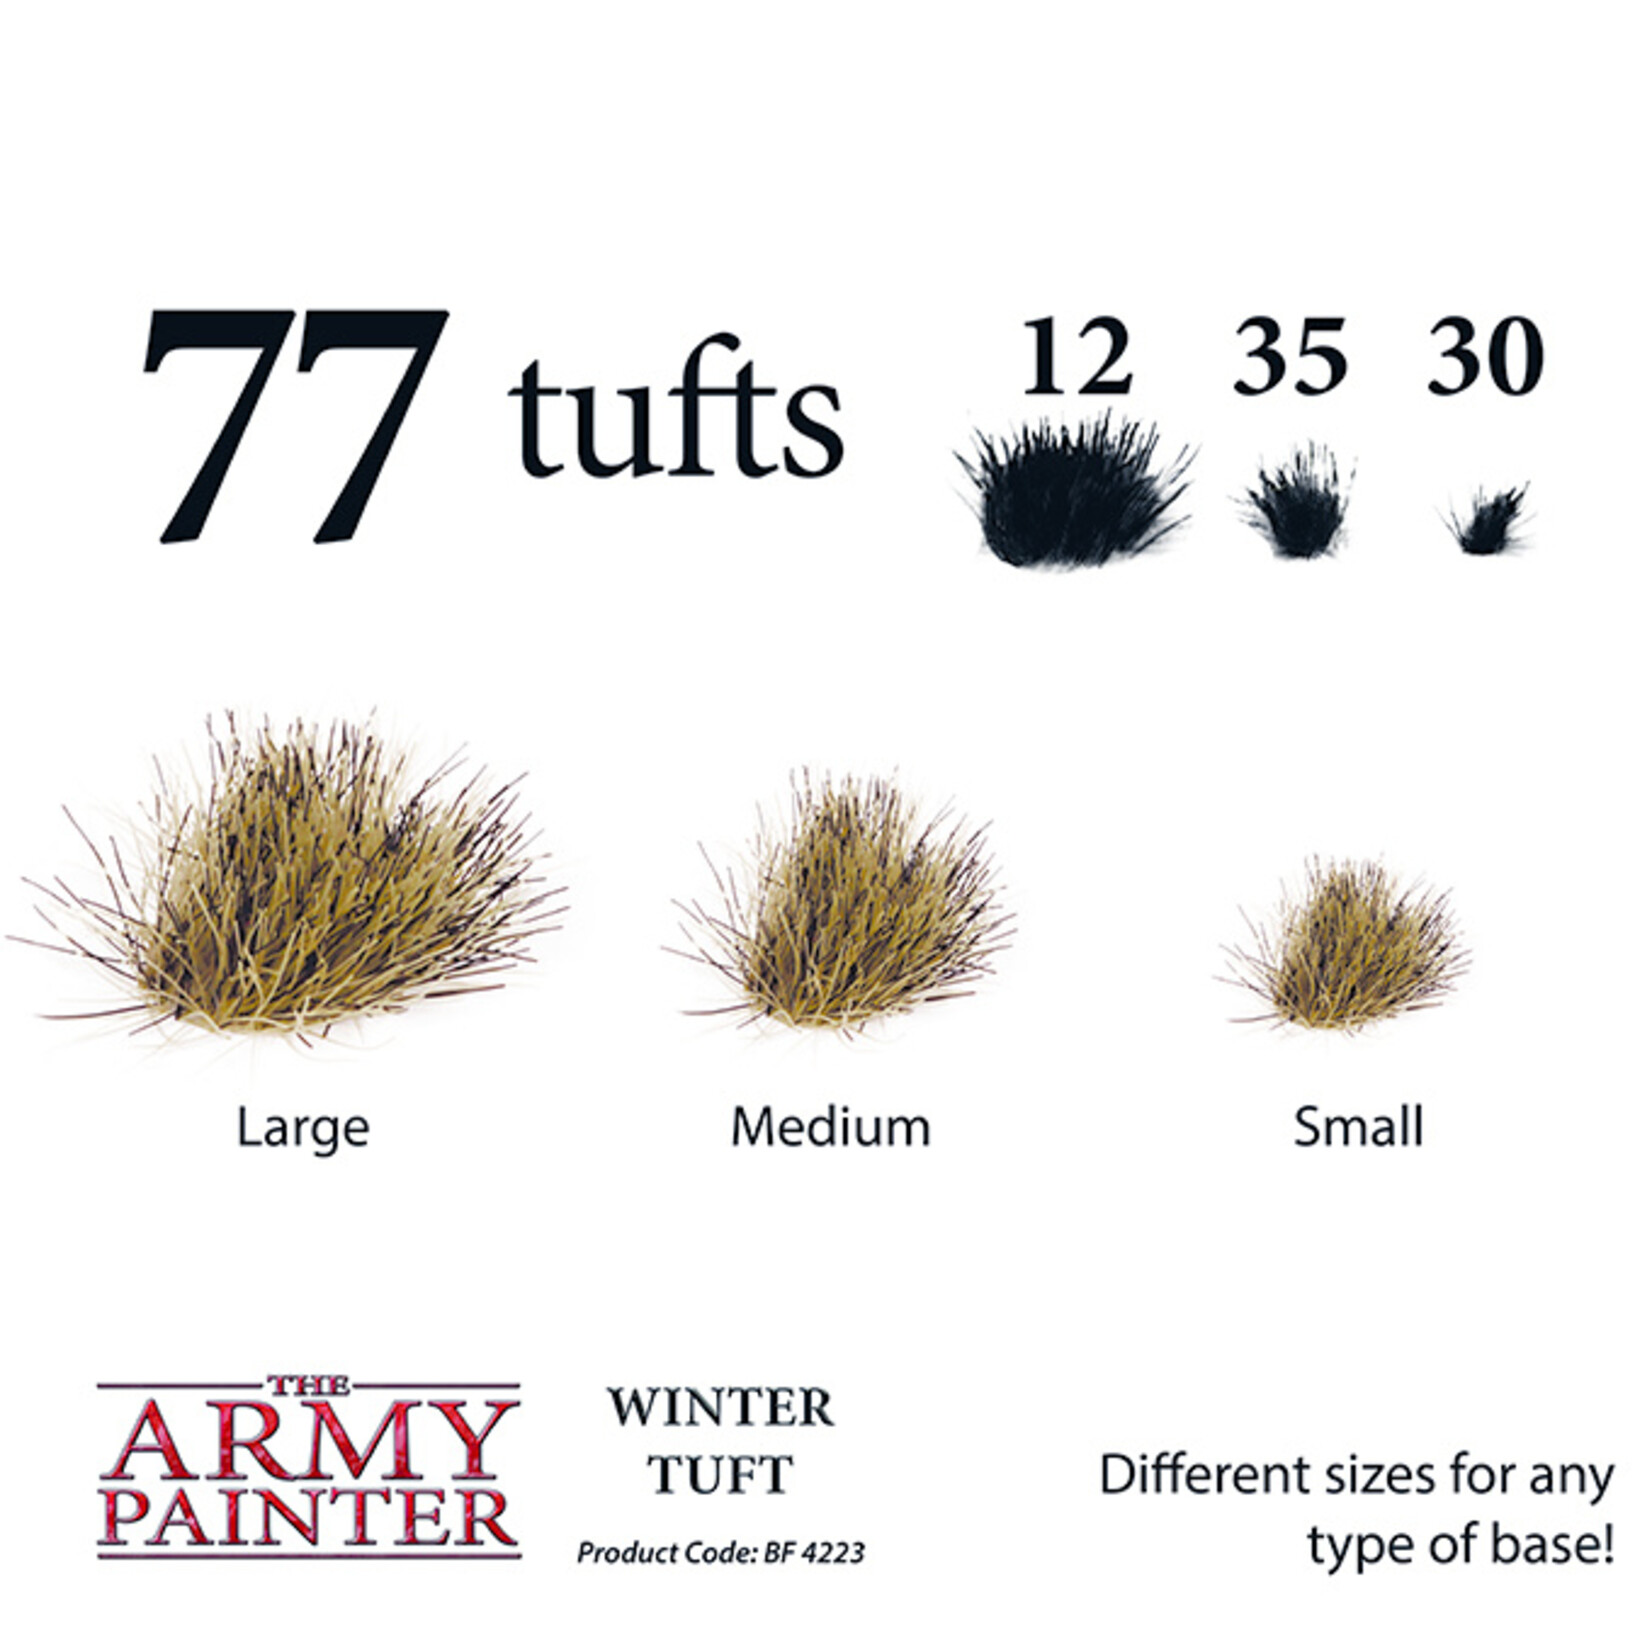 The Army Painter The Army Painter Tufts - Winter